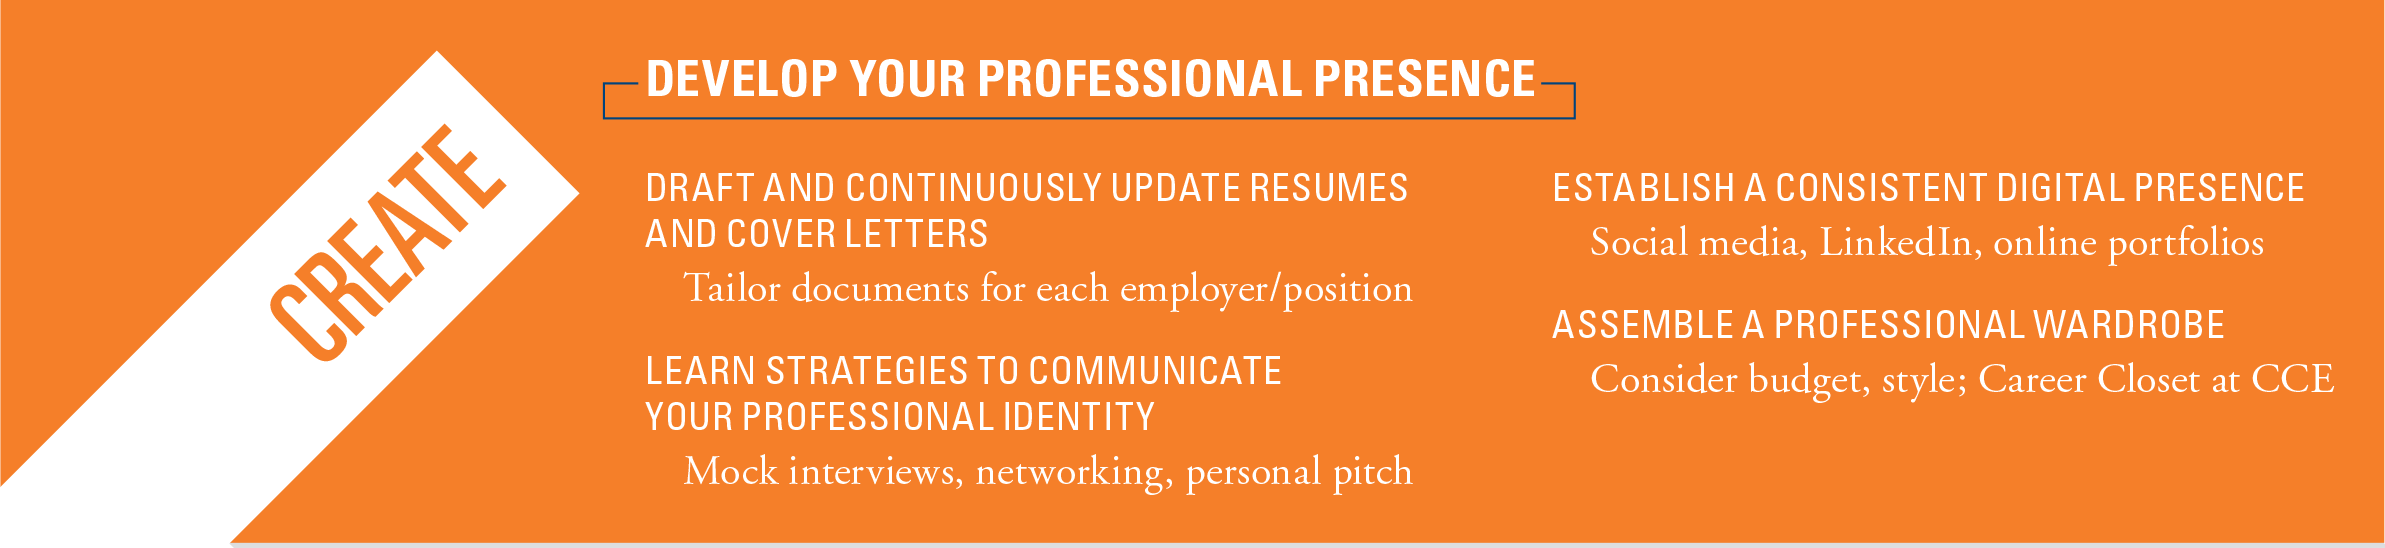 Create: develop your professional presence